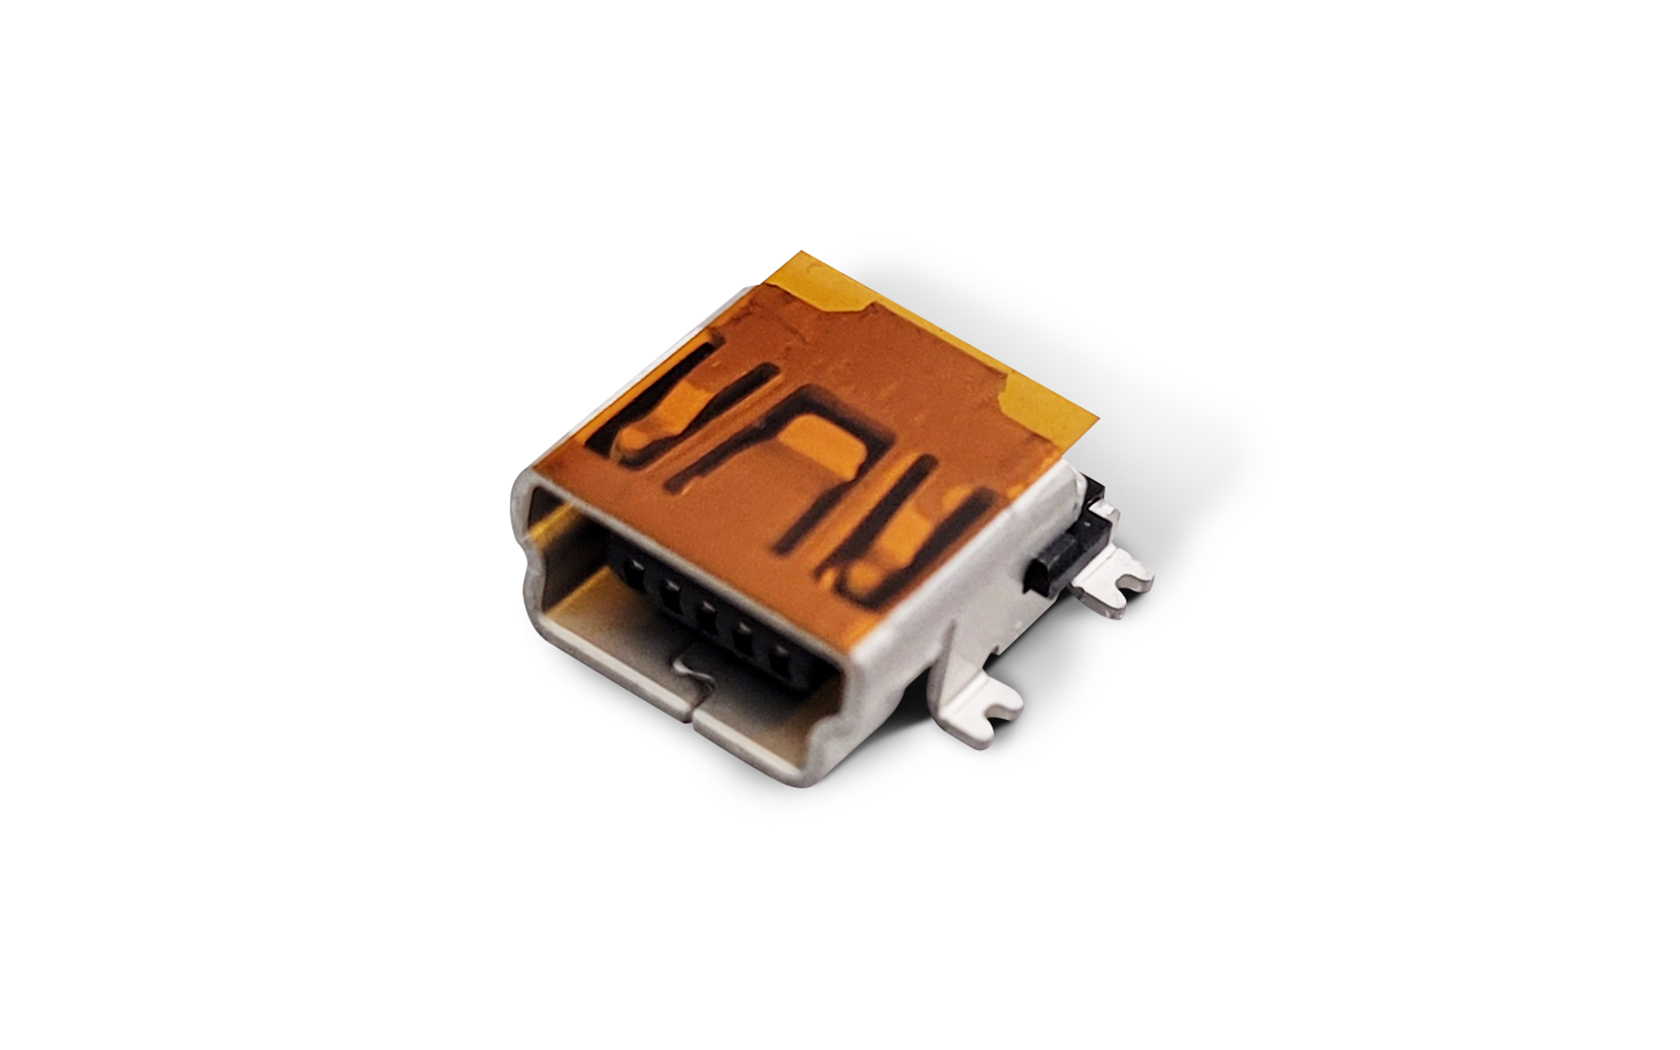 Iriso Electronics - Product I/O connector 6661S series